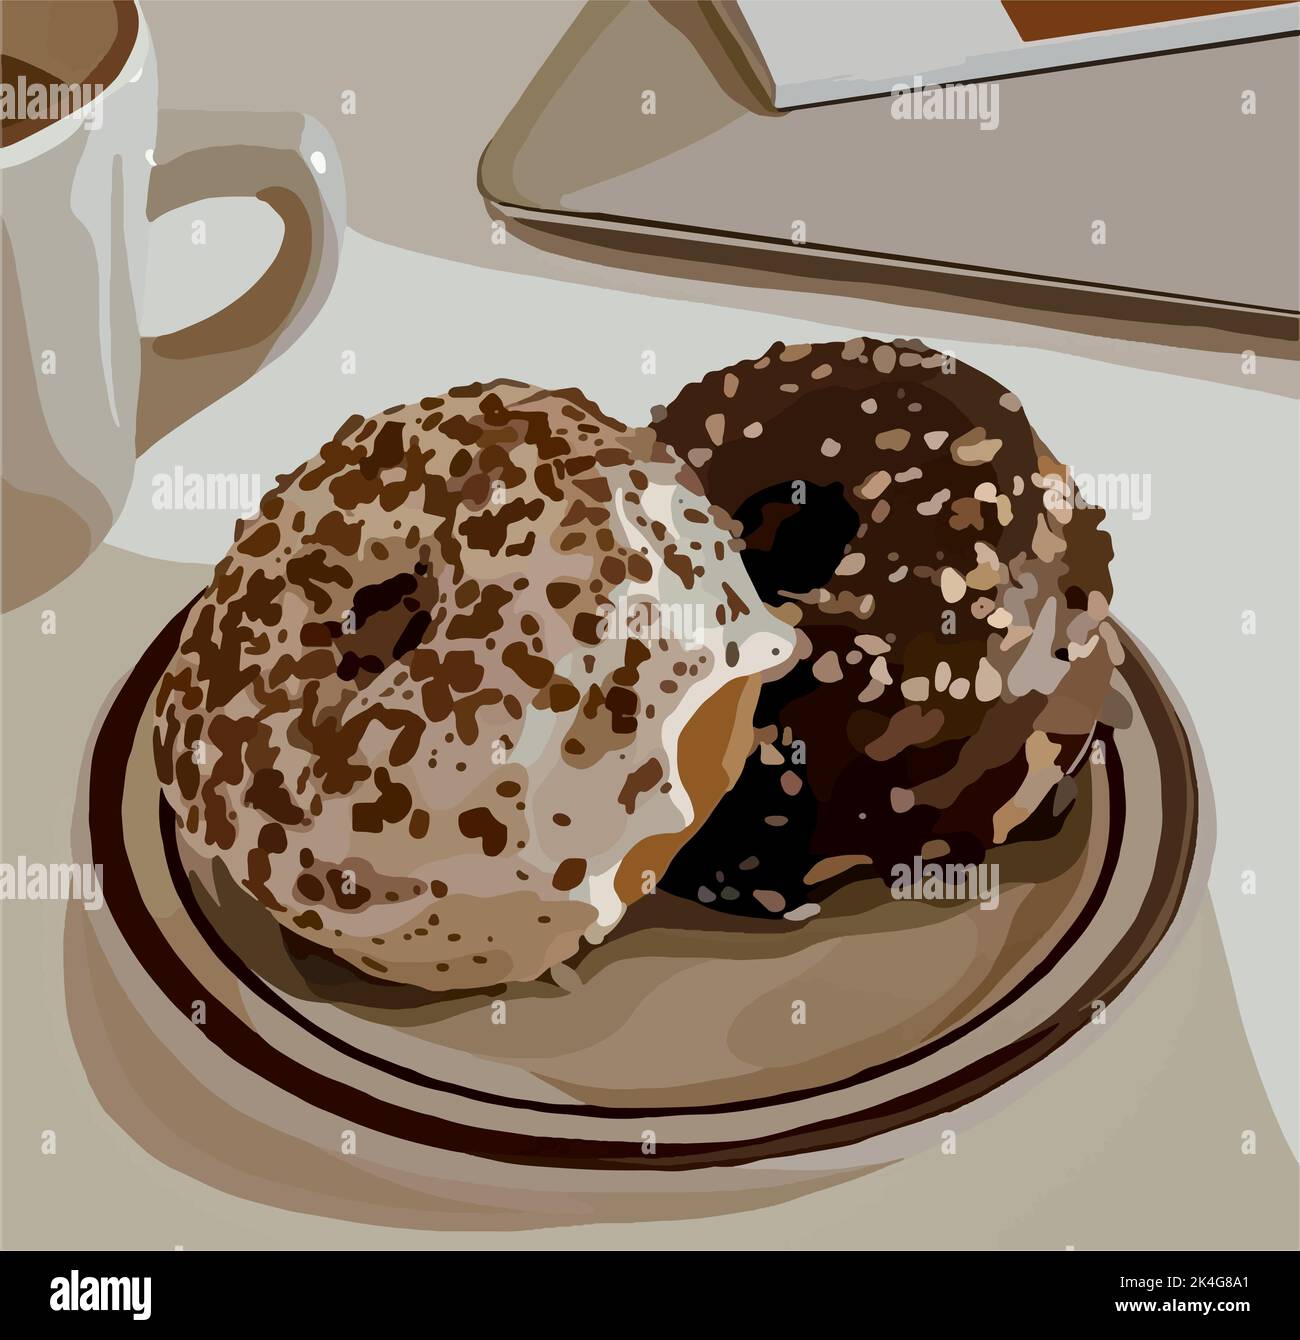 Delicious chocolate donuts on a plate. Vector fashion illustration Stock Vector